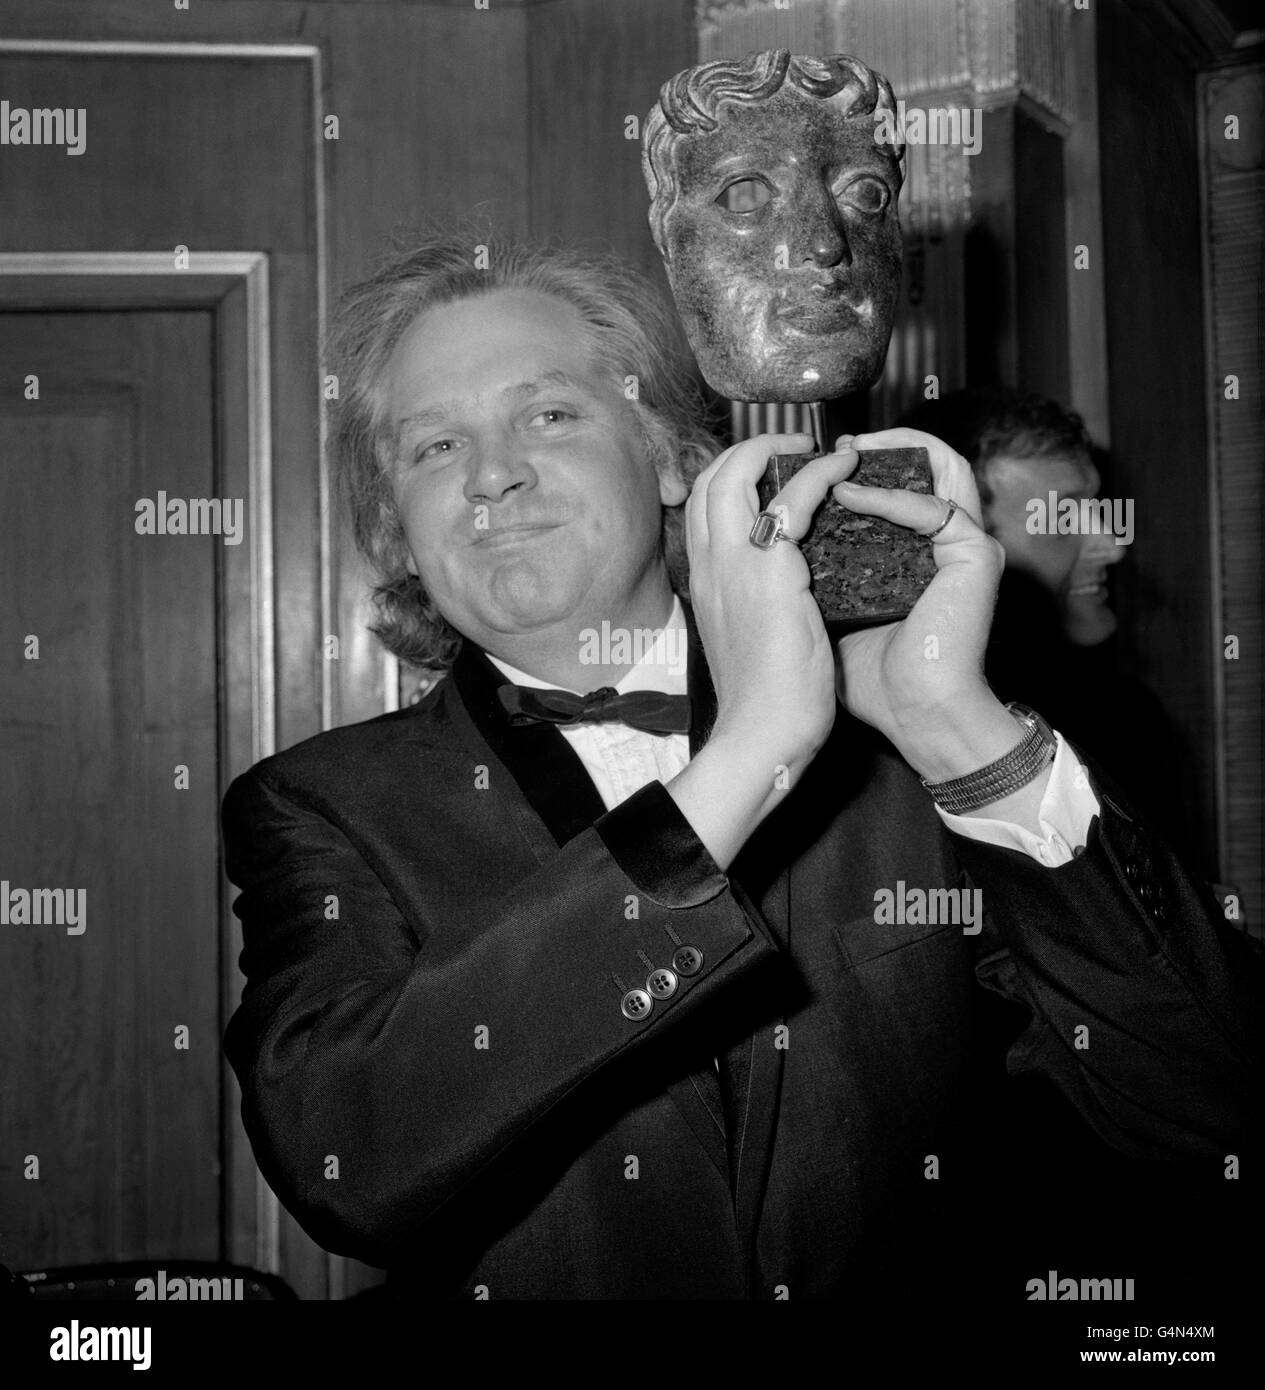 Director Ken Russell, who holds aloft the Desmond Davis Award presented to him at the Guild of Television Producers and Directors Awards Ball at the Dorchester Hotel, London. he was presented the award for his outstanding contribution to documentaries. Stock Photo